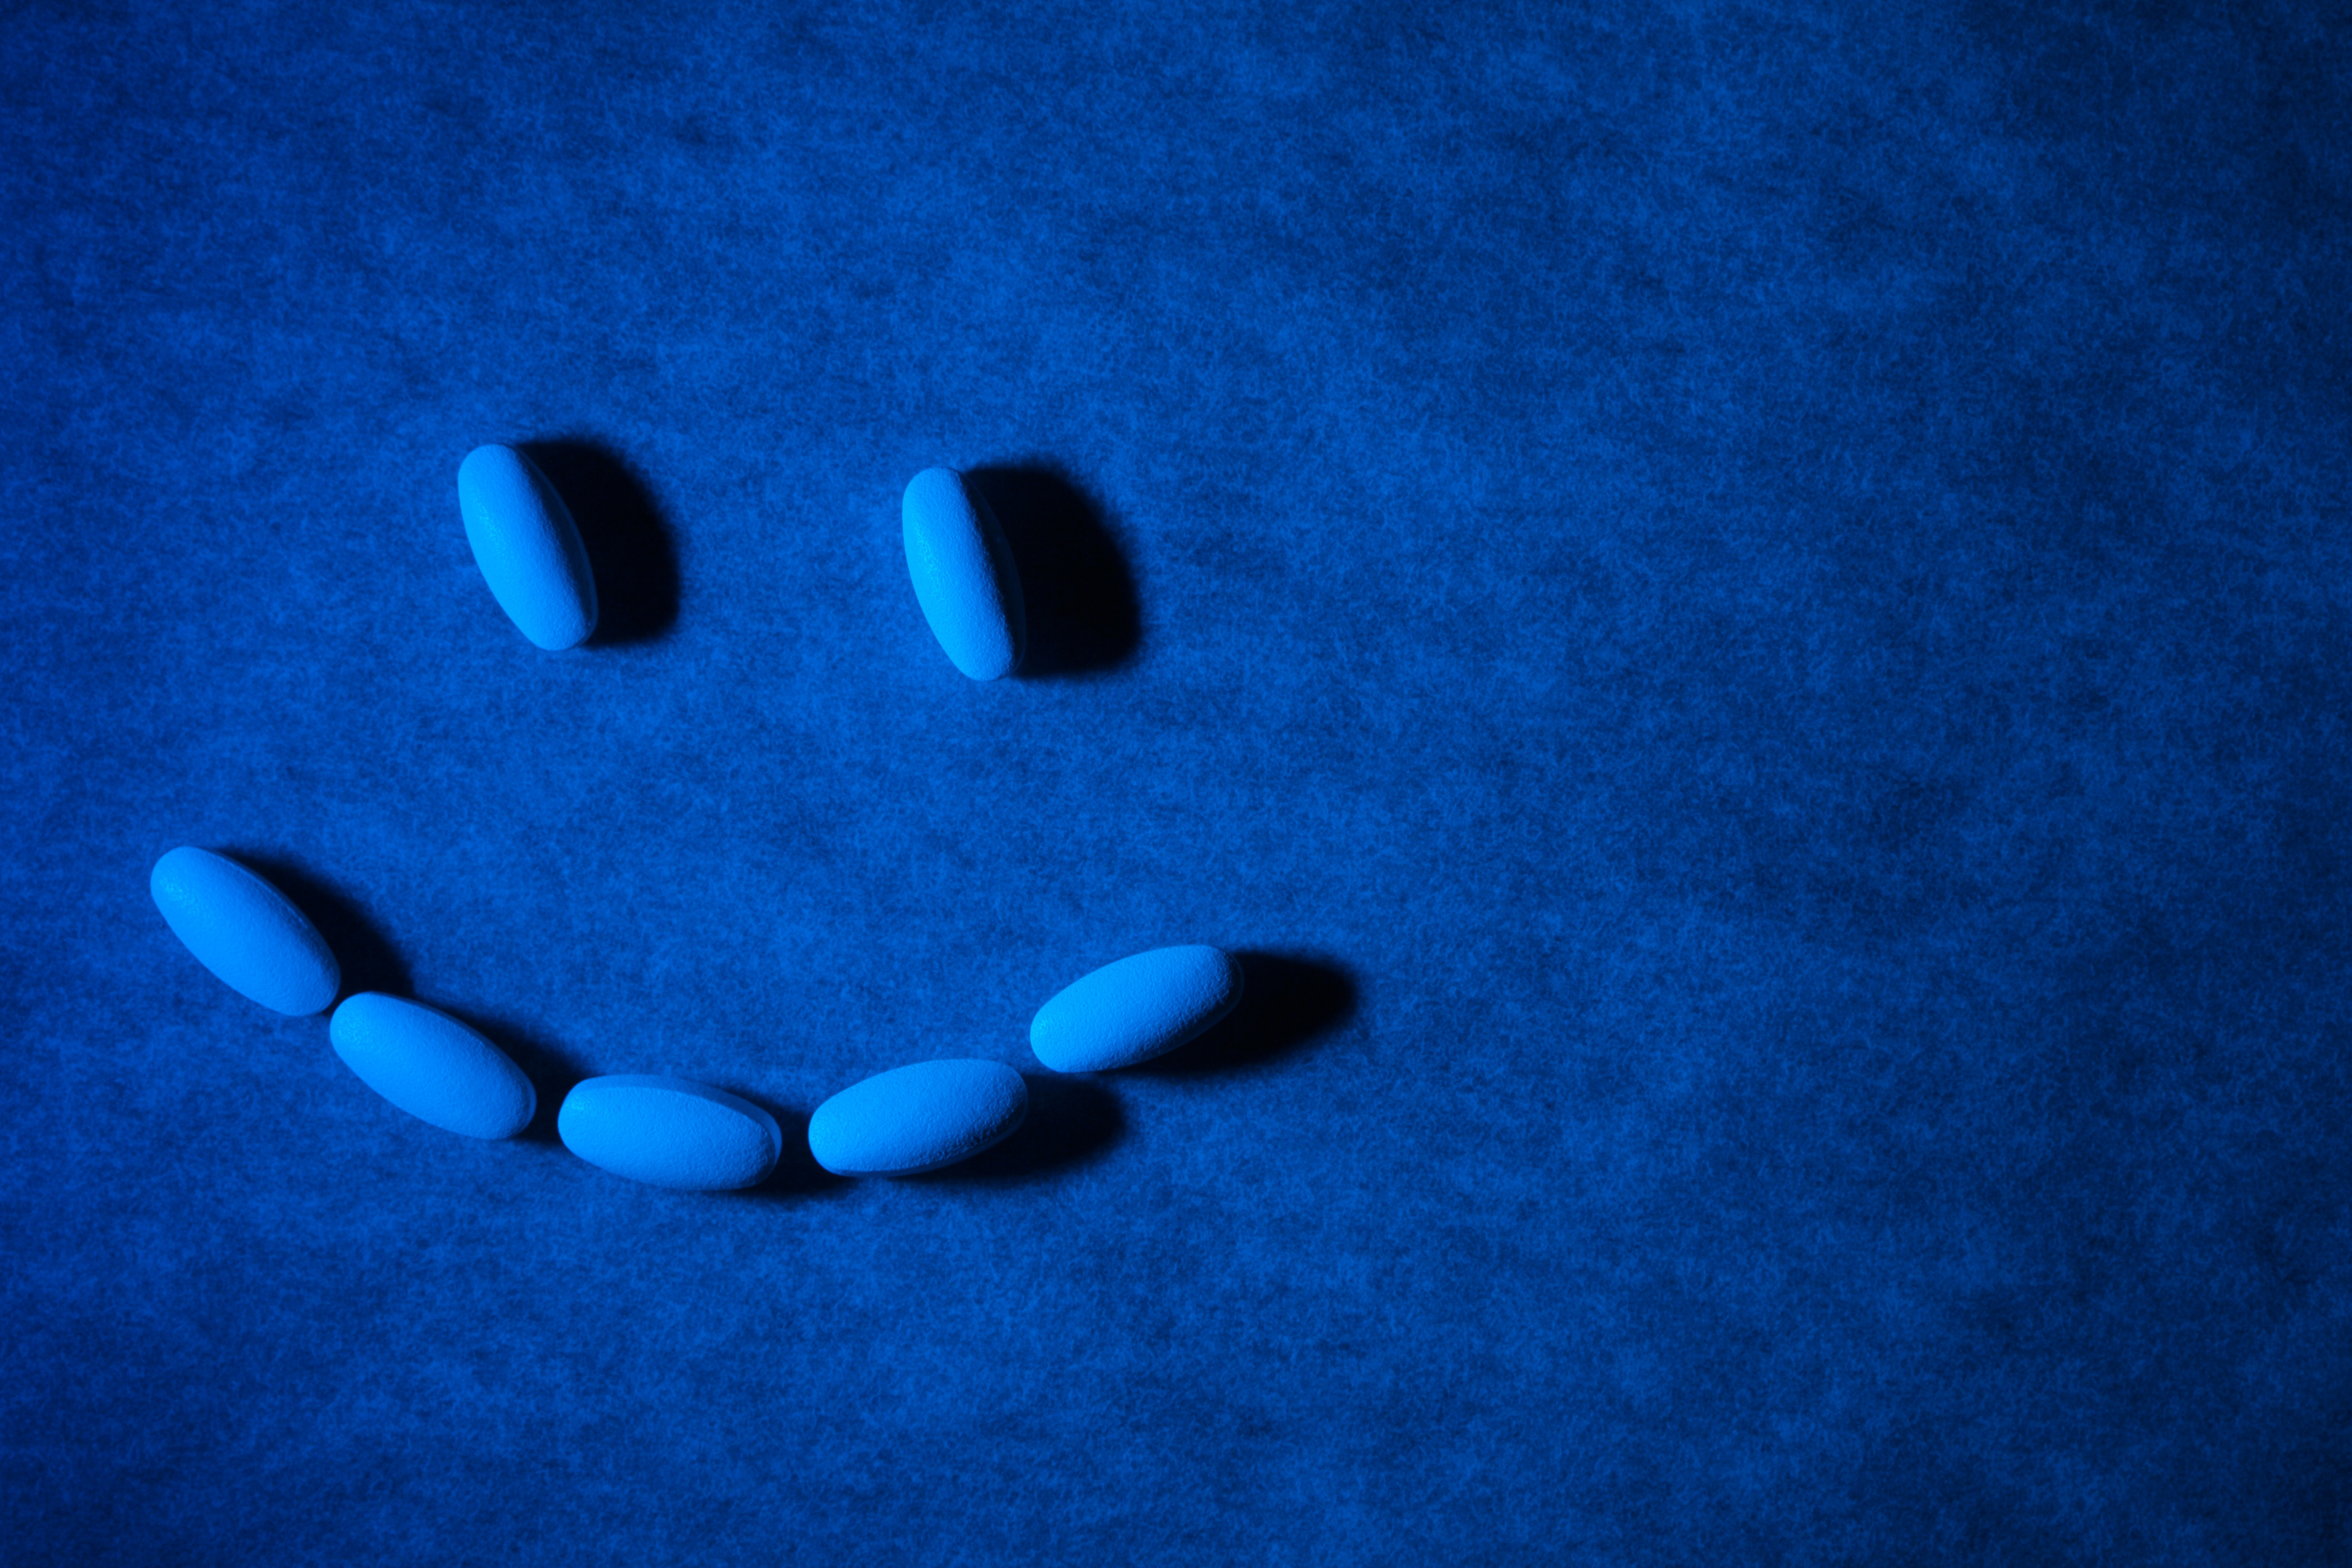 Medical pills on textured background with blue lighting. Pills are arranged in the form of a smiling face.